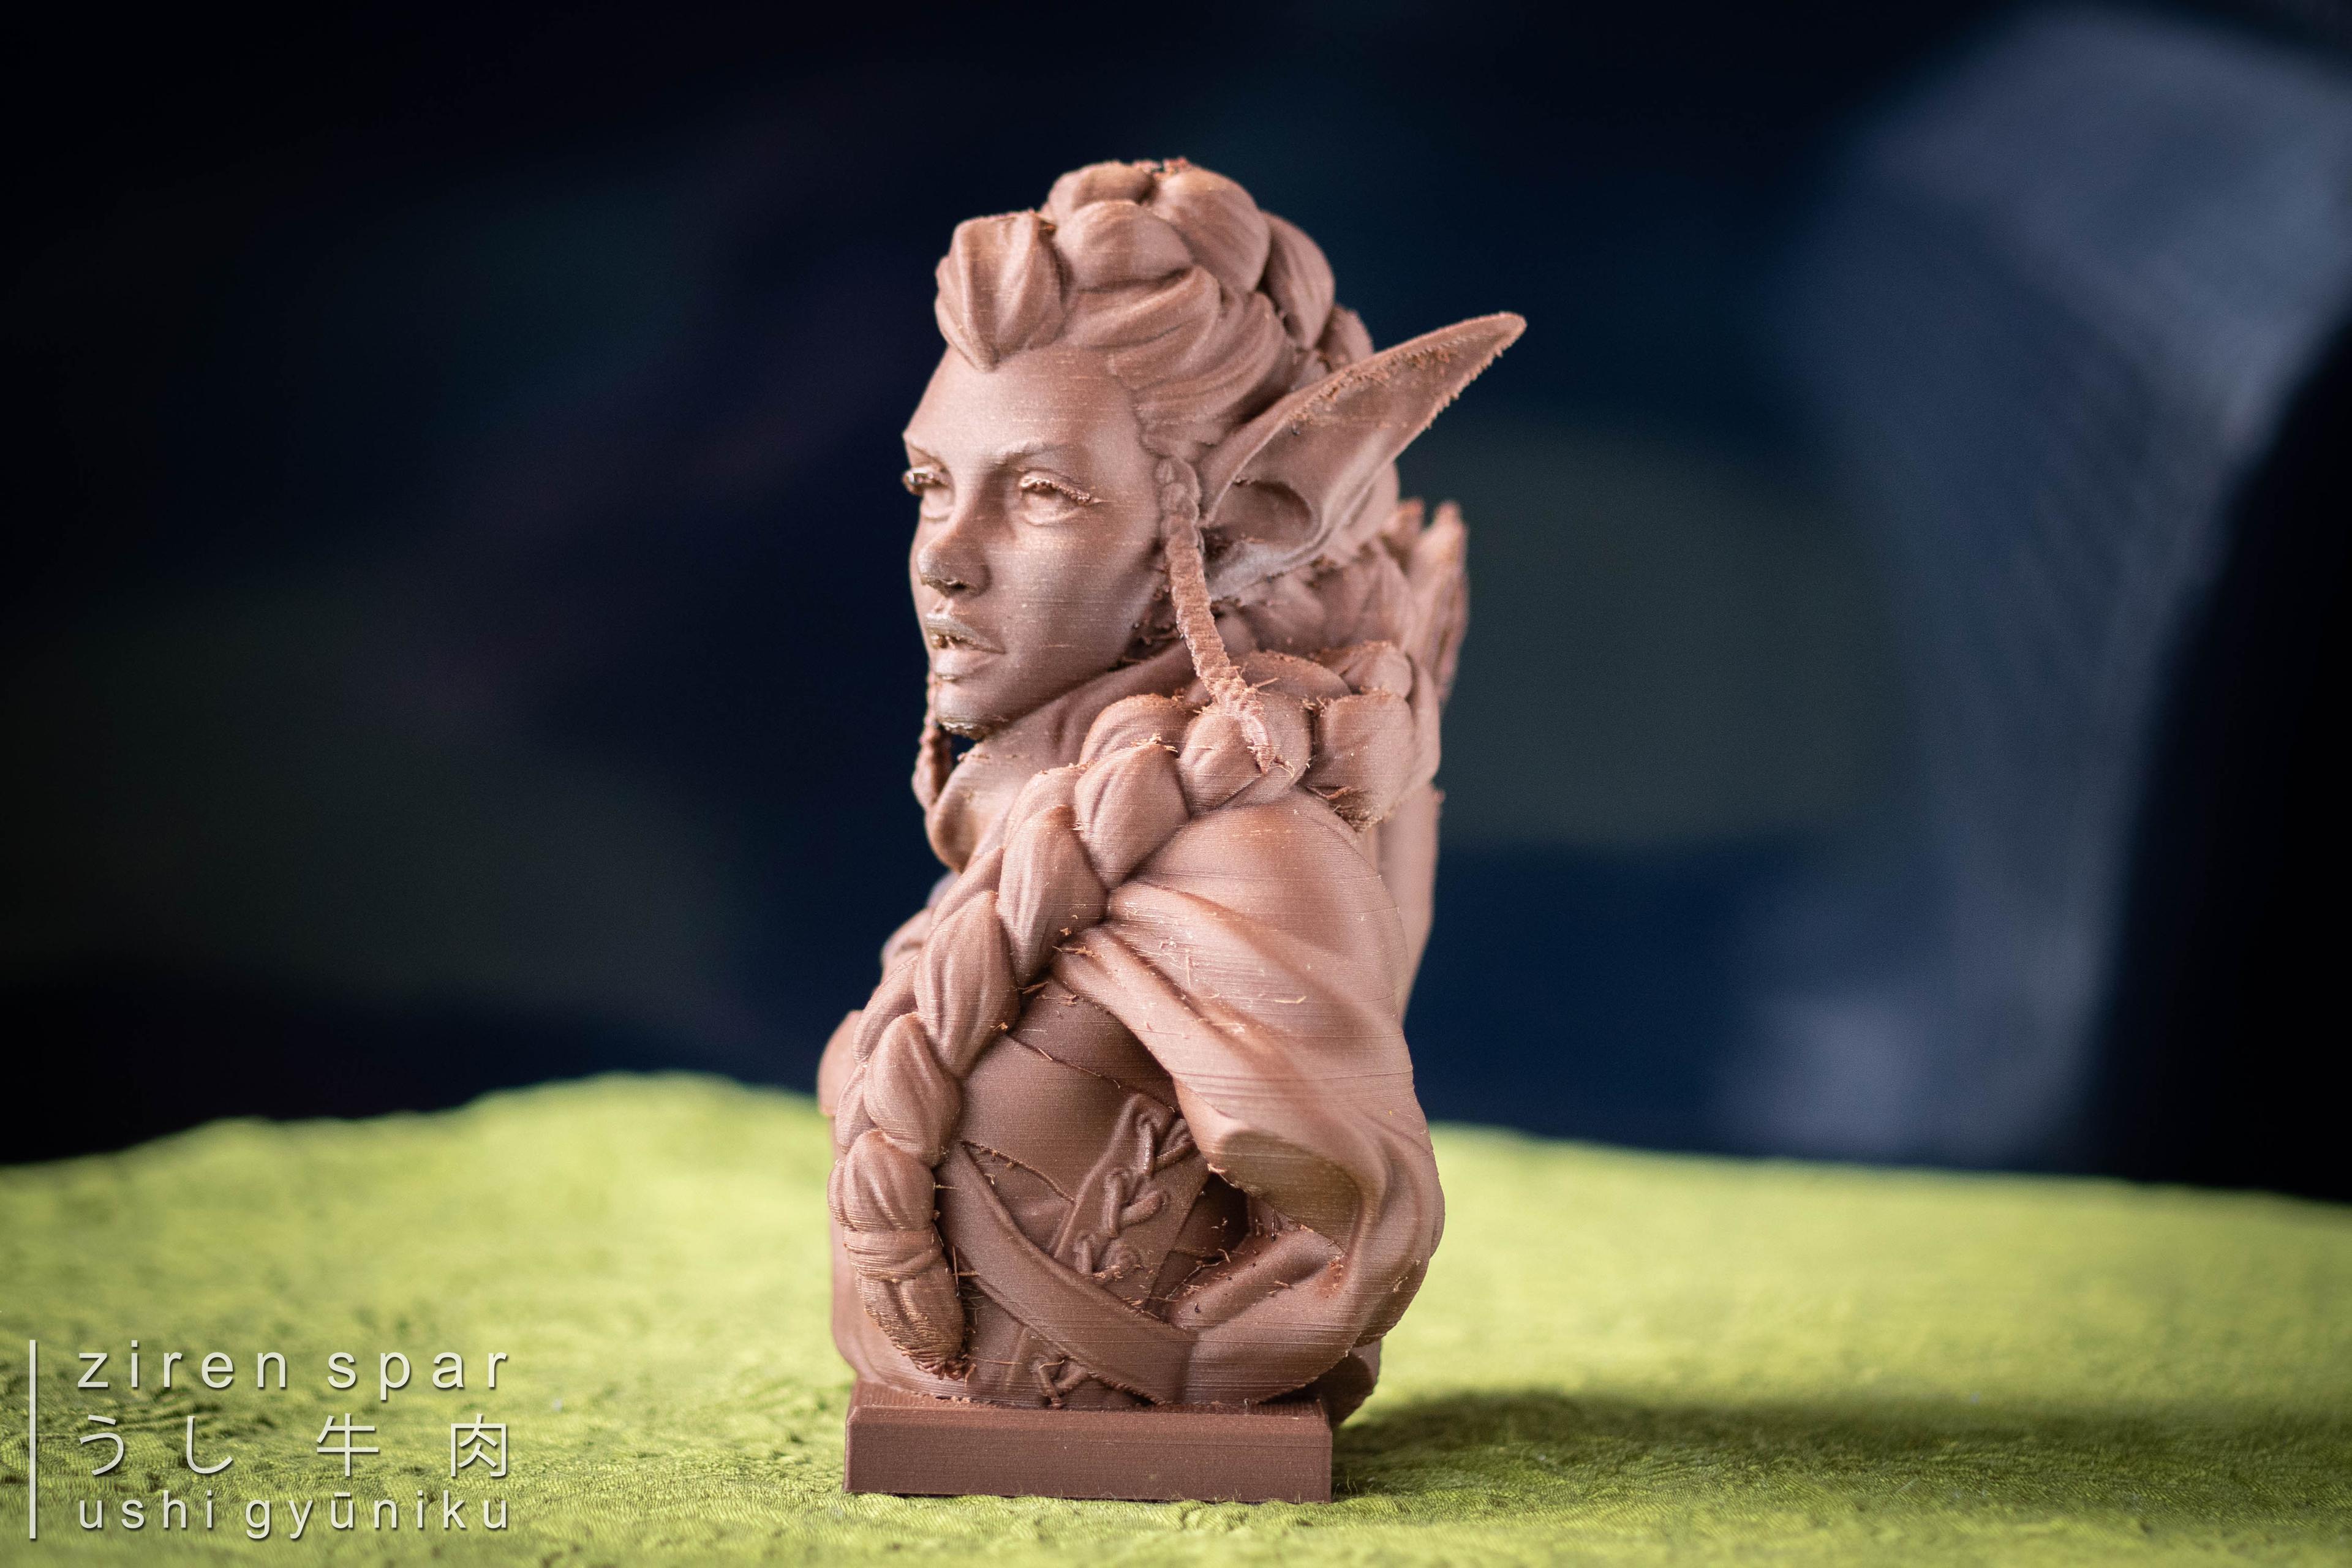 Elf Archer Bust Support Free - elf archer bust. the filament I used is two years since I opened which I simply dried and works fantastic except for the stringing as I didn't really try to find its sweet spot 😅
🧵 colorfabb corkfill
💾 iczfirz or kk11243234567891
🖨️ cetus3d w/ capricorn tube & diamondback nozzle
📐 ~295% scale, 180mm tall
📸 gears: niichan
🧩 assist: touchan & kāchan
#filamentfebruary - 3d model